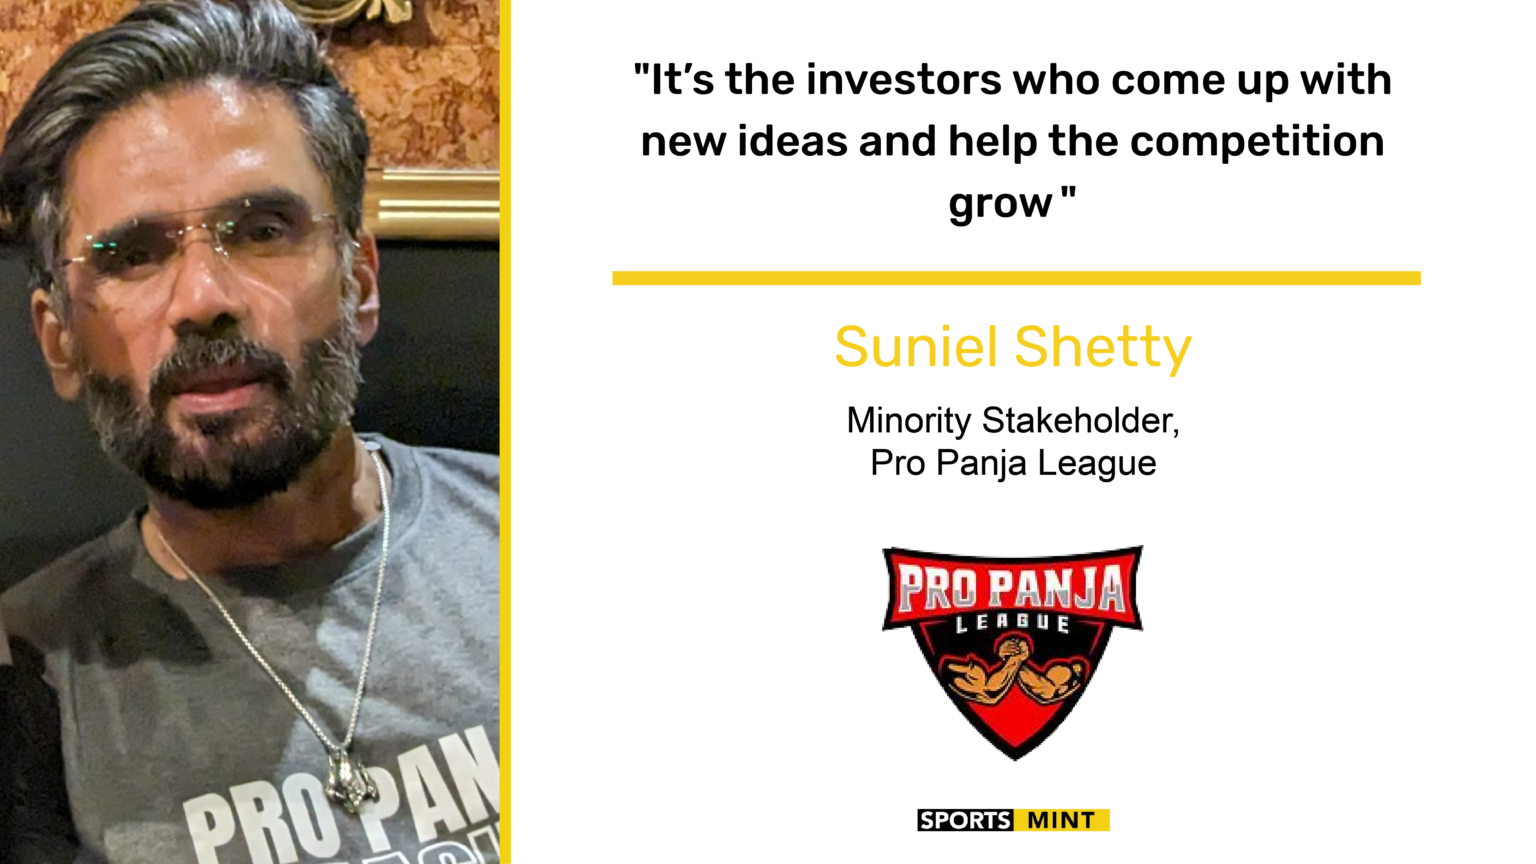 Exclusive: It’s the investors who come up with new ideas and help the competition grow - Suniel Shetty, Minority Shareholder of Pro Panja League